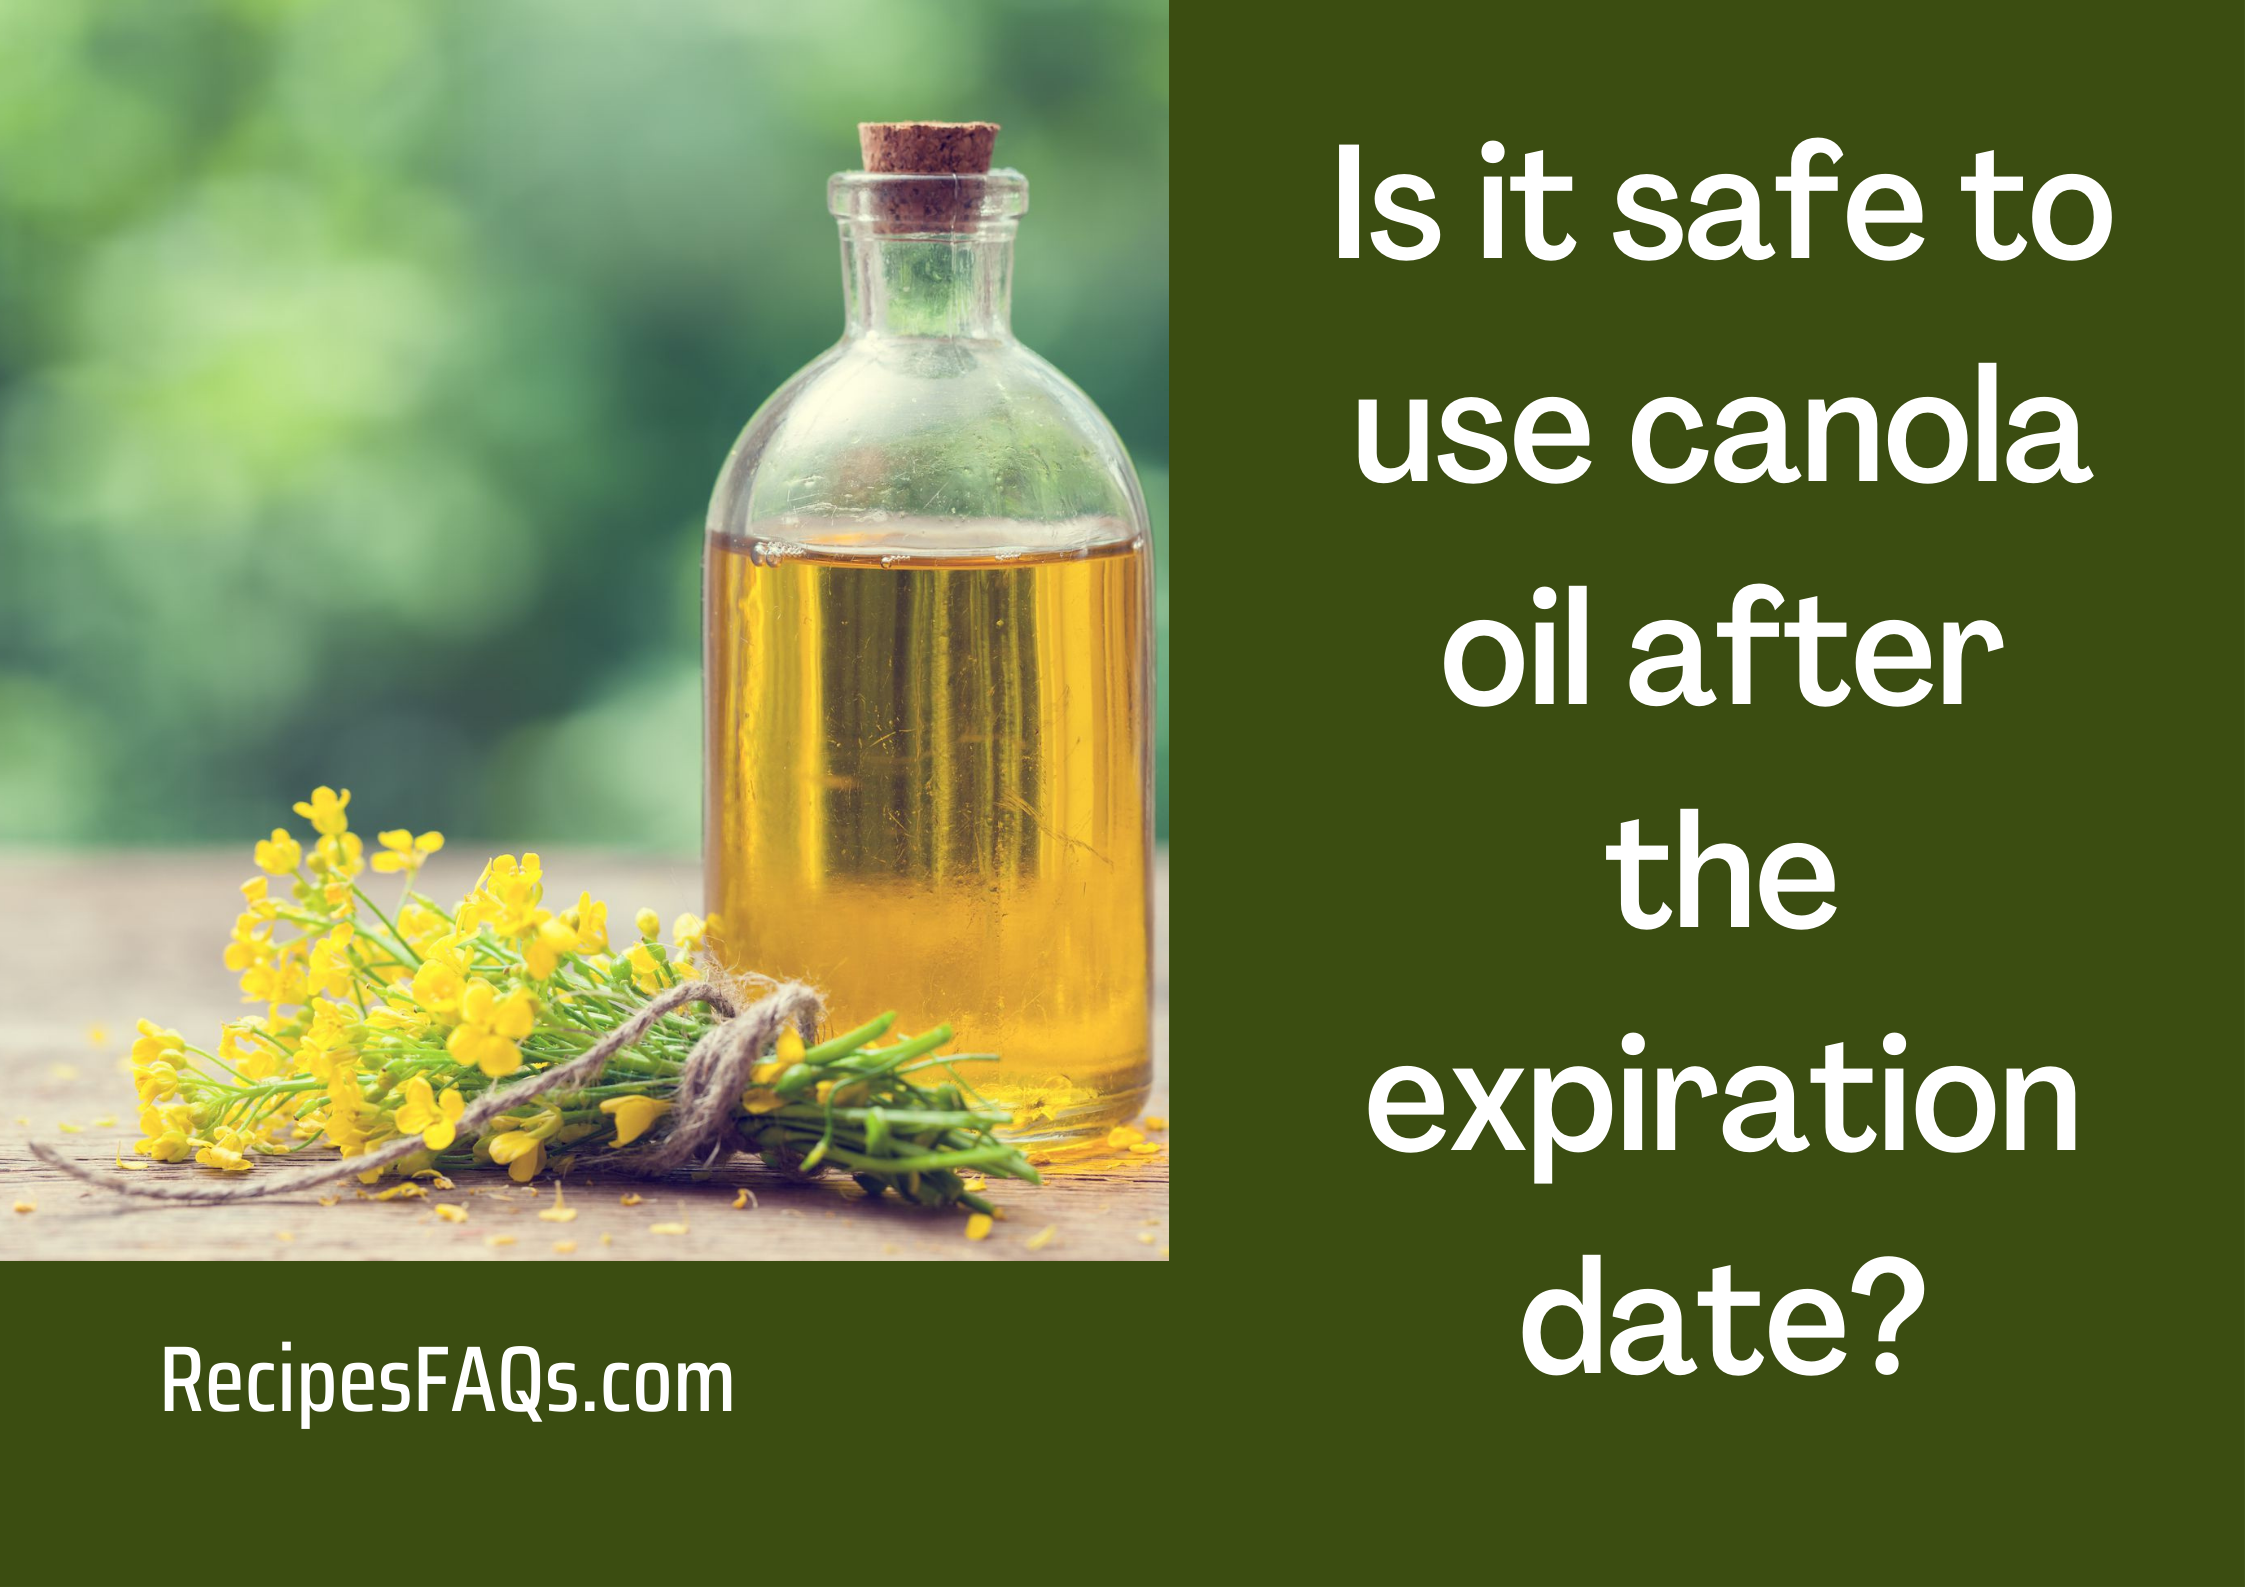 Is it safe to use canola oil after the expiration date